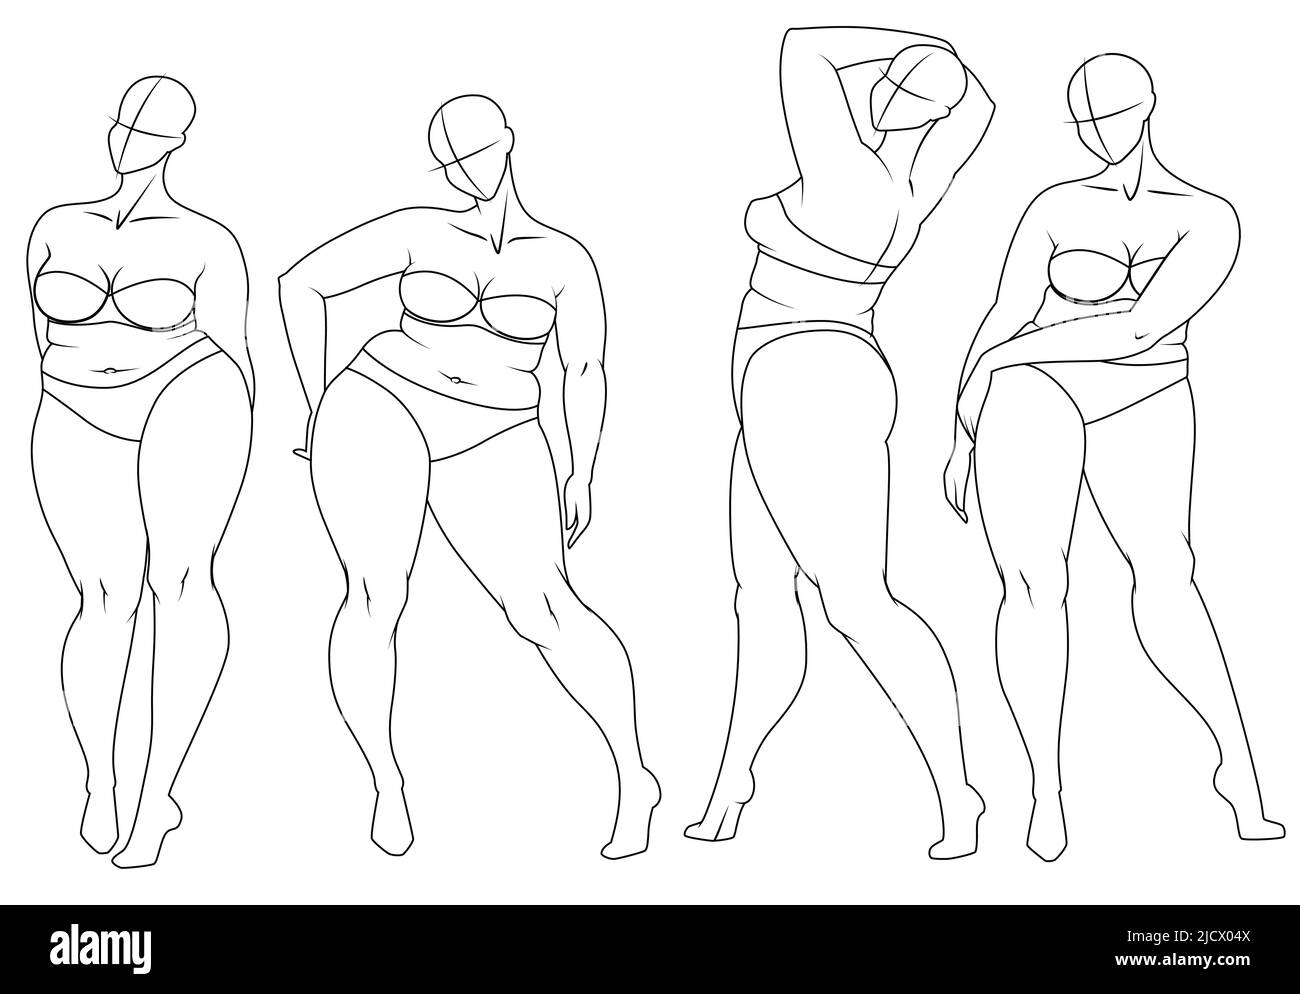 Plus Size Fashion Figure Templates. Exaggerated Croquis for Fashion Design and Illustration. Vector Illustration Stock Vector